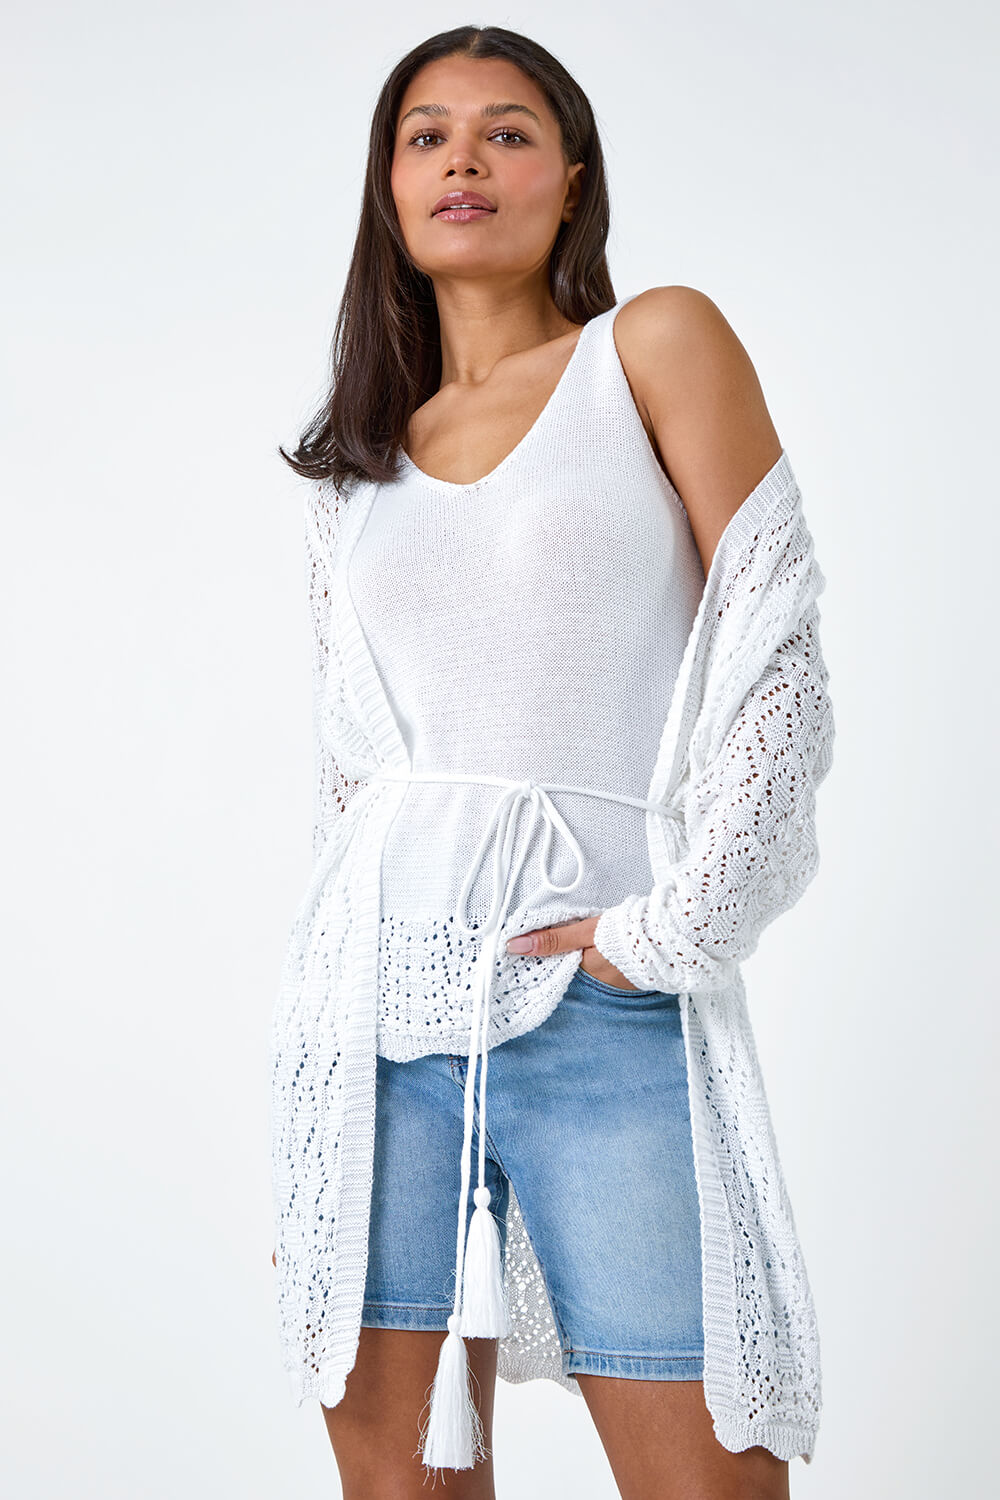 White Pointelle Knitted Vest Top, Image 2 of 7